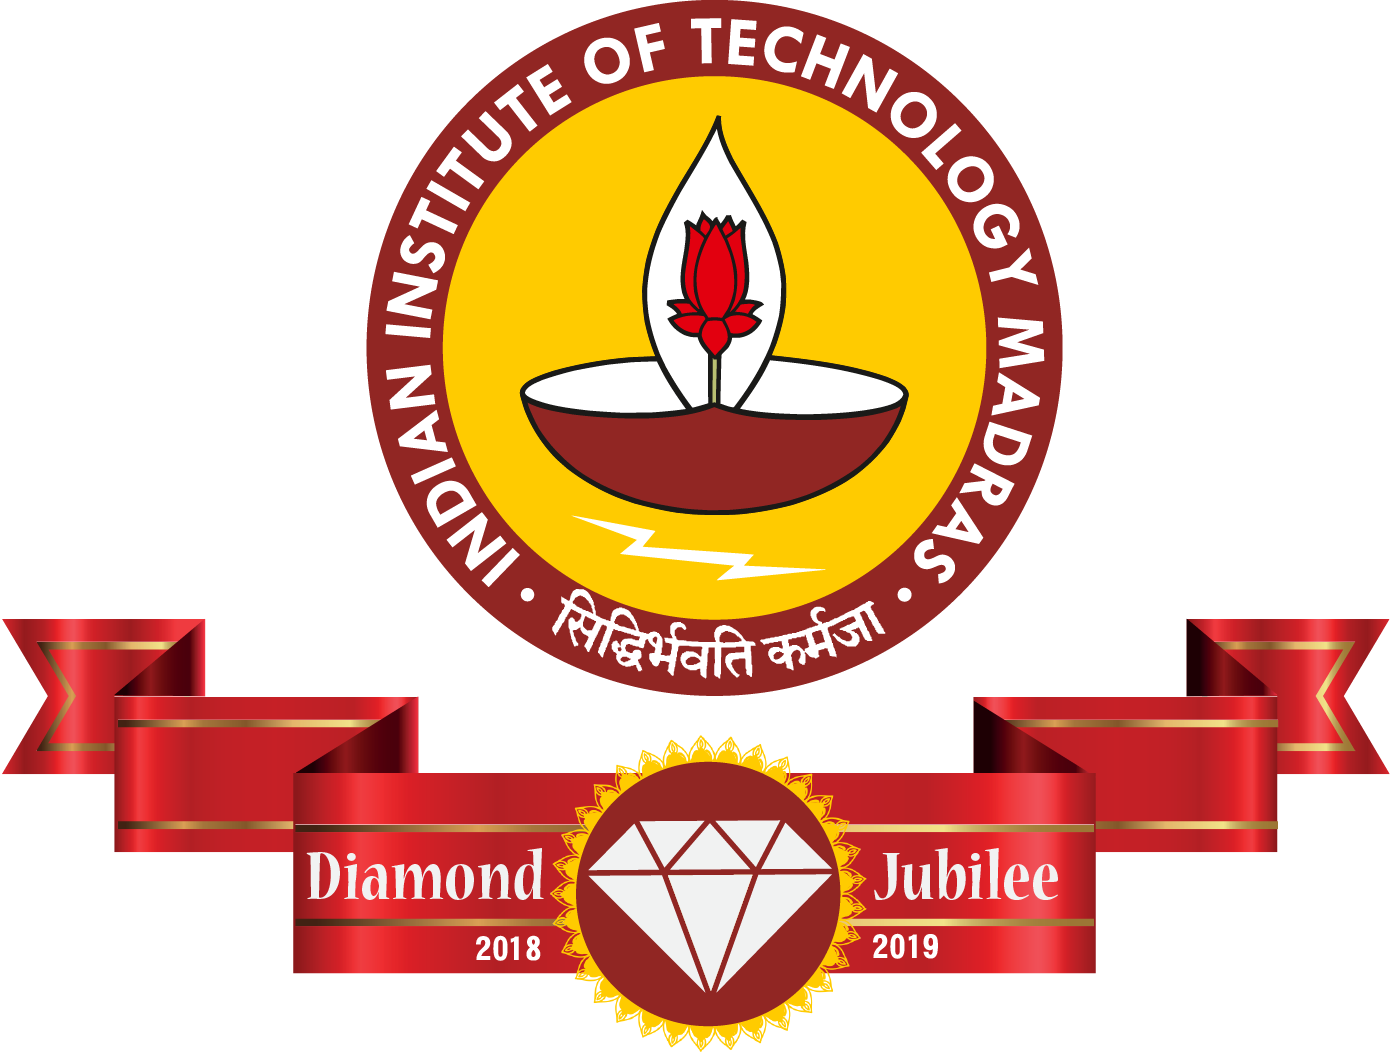 INDIAN INSTITUTE OF TECHNOLOGY MADRAS  